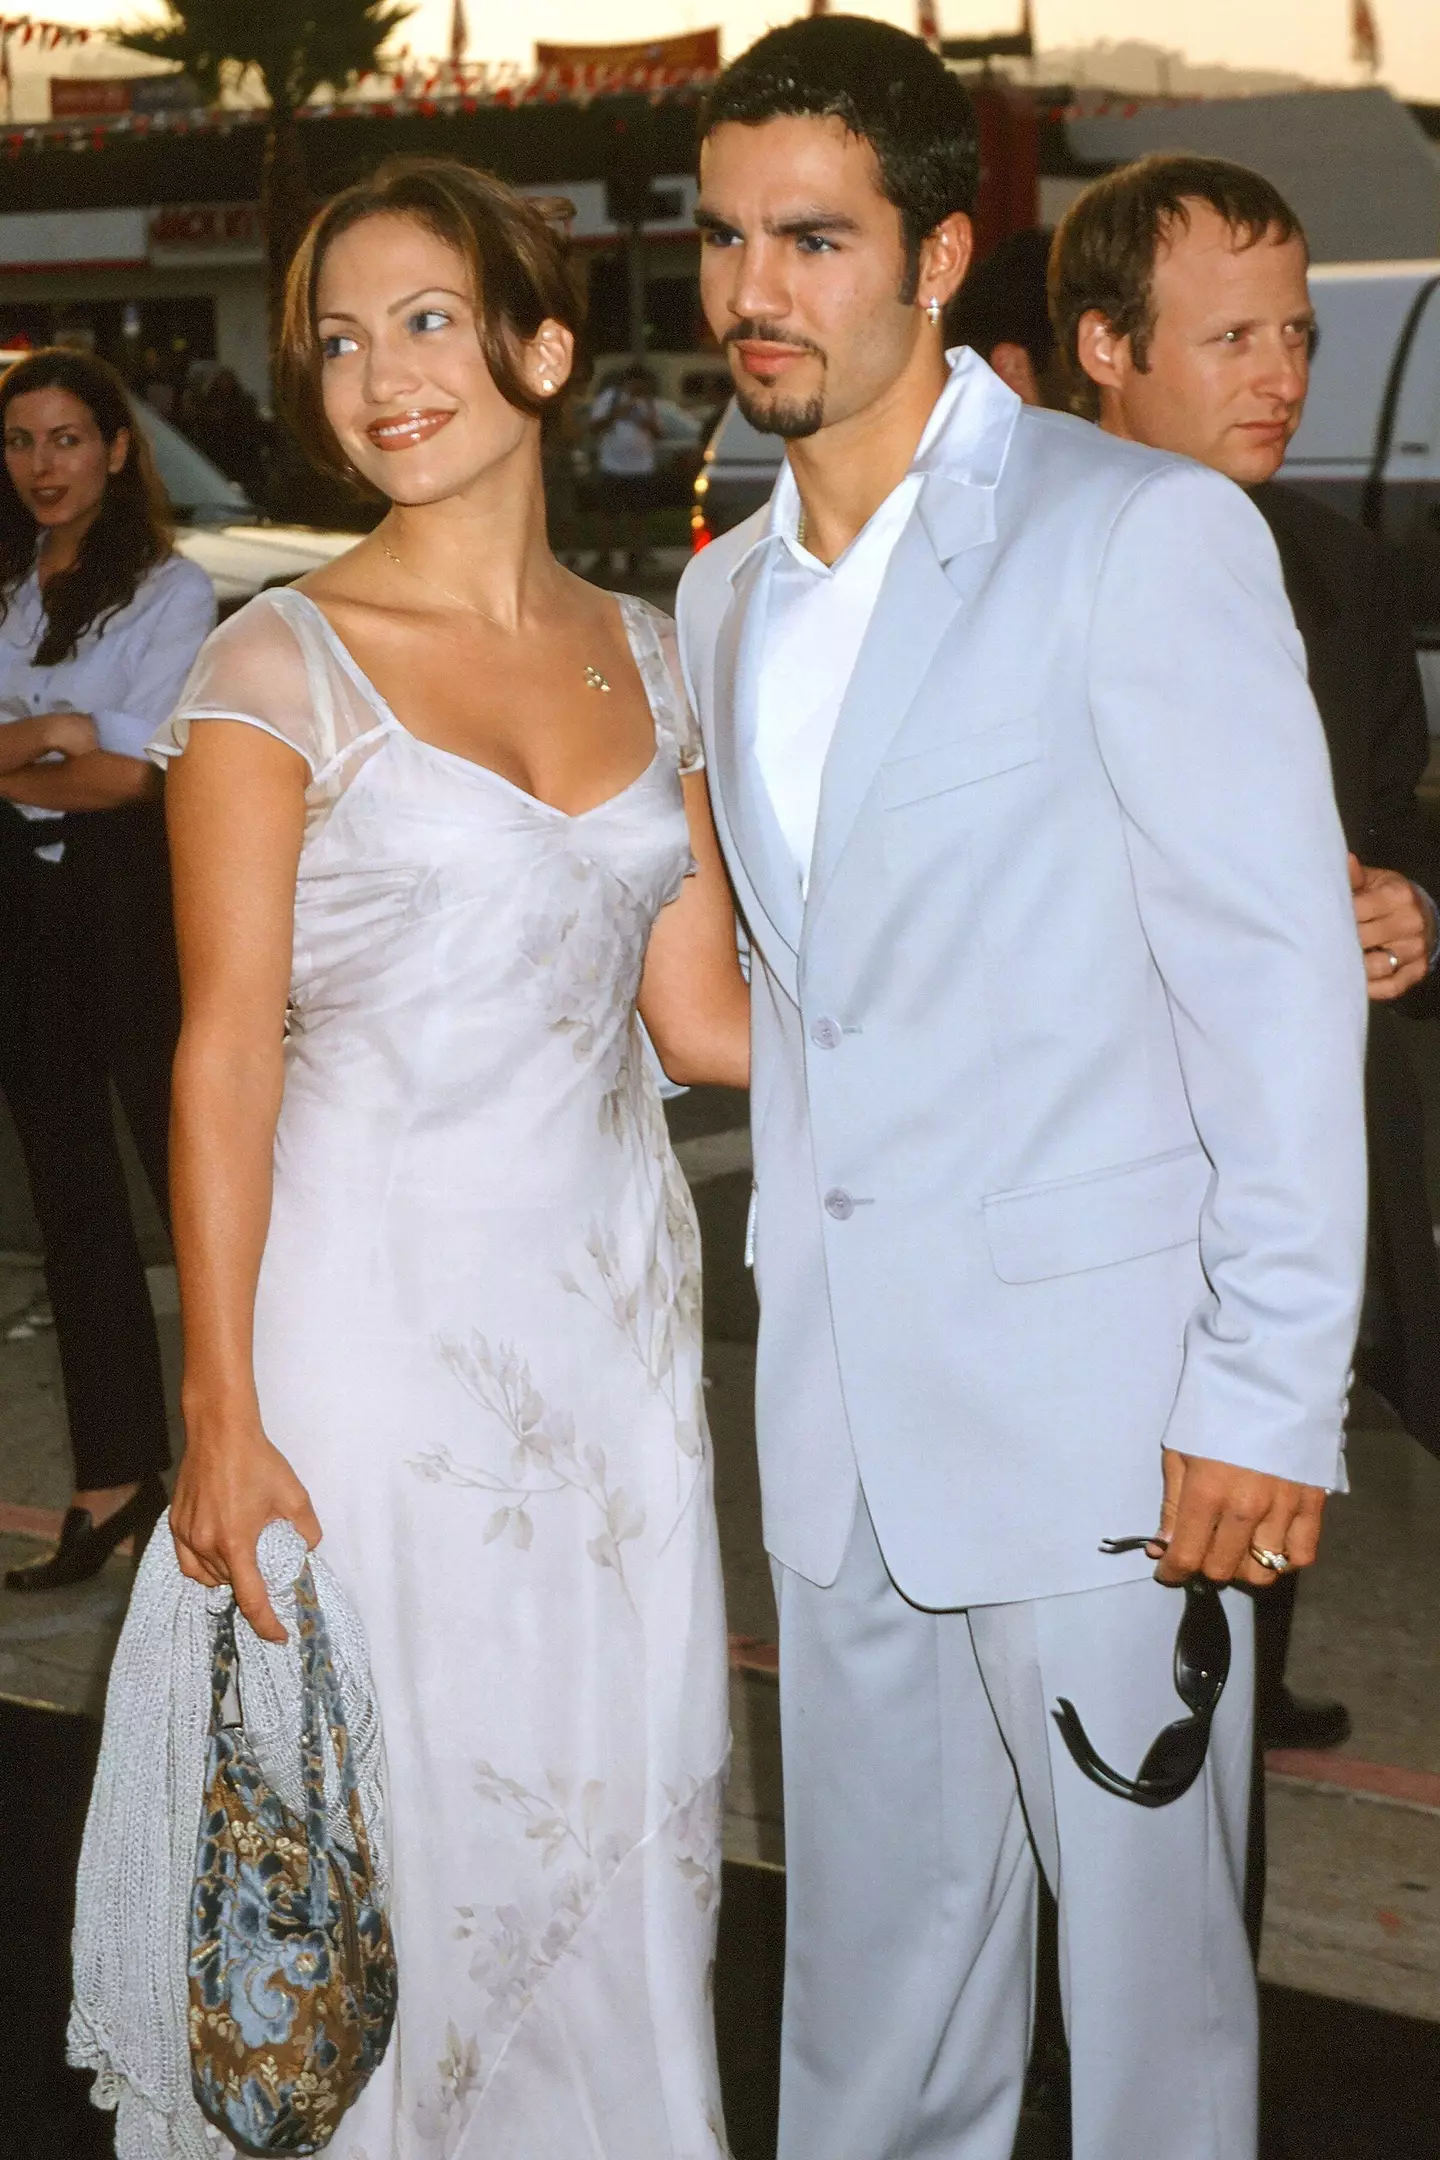 The pair were married in 1997.